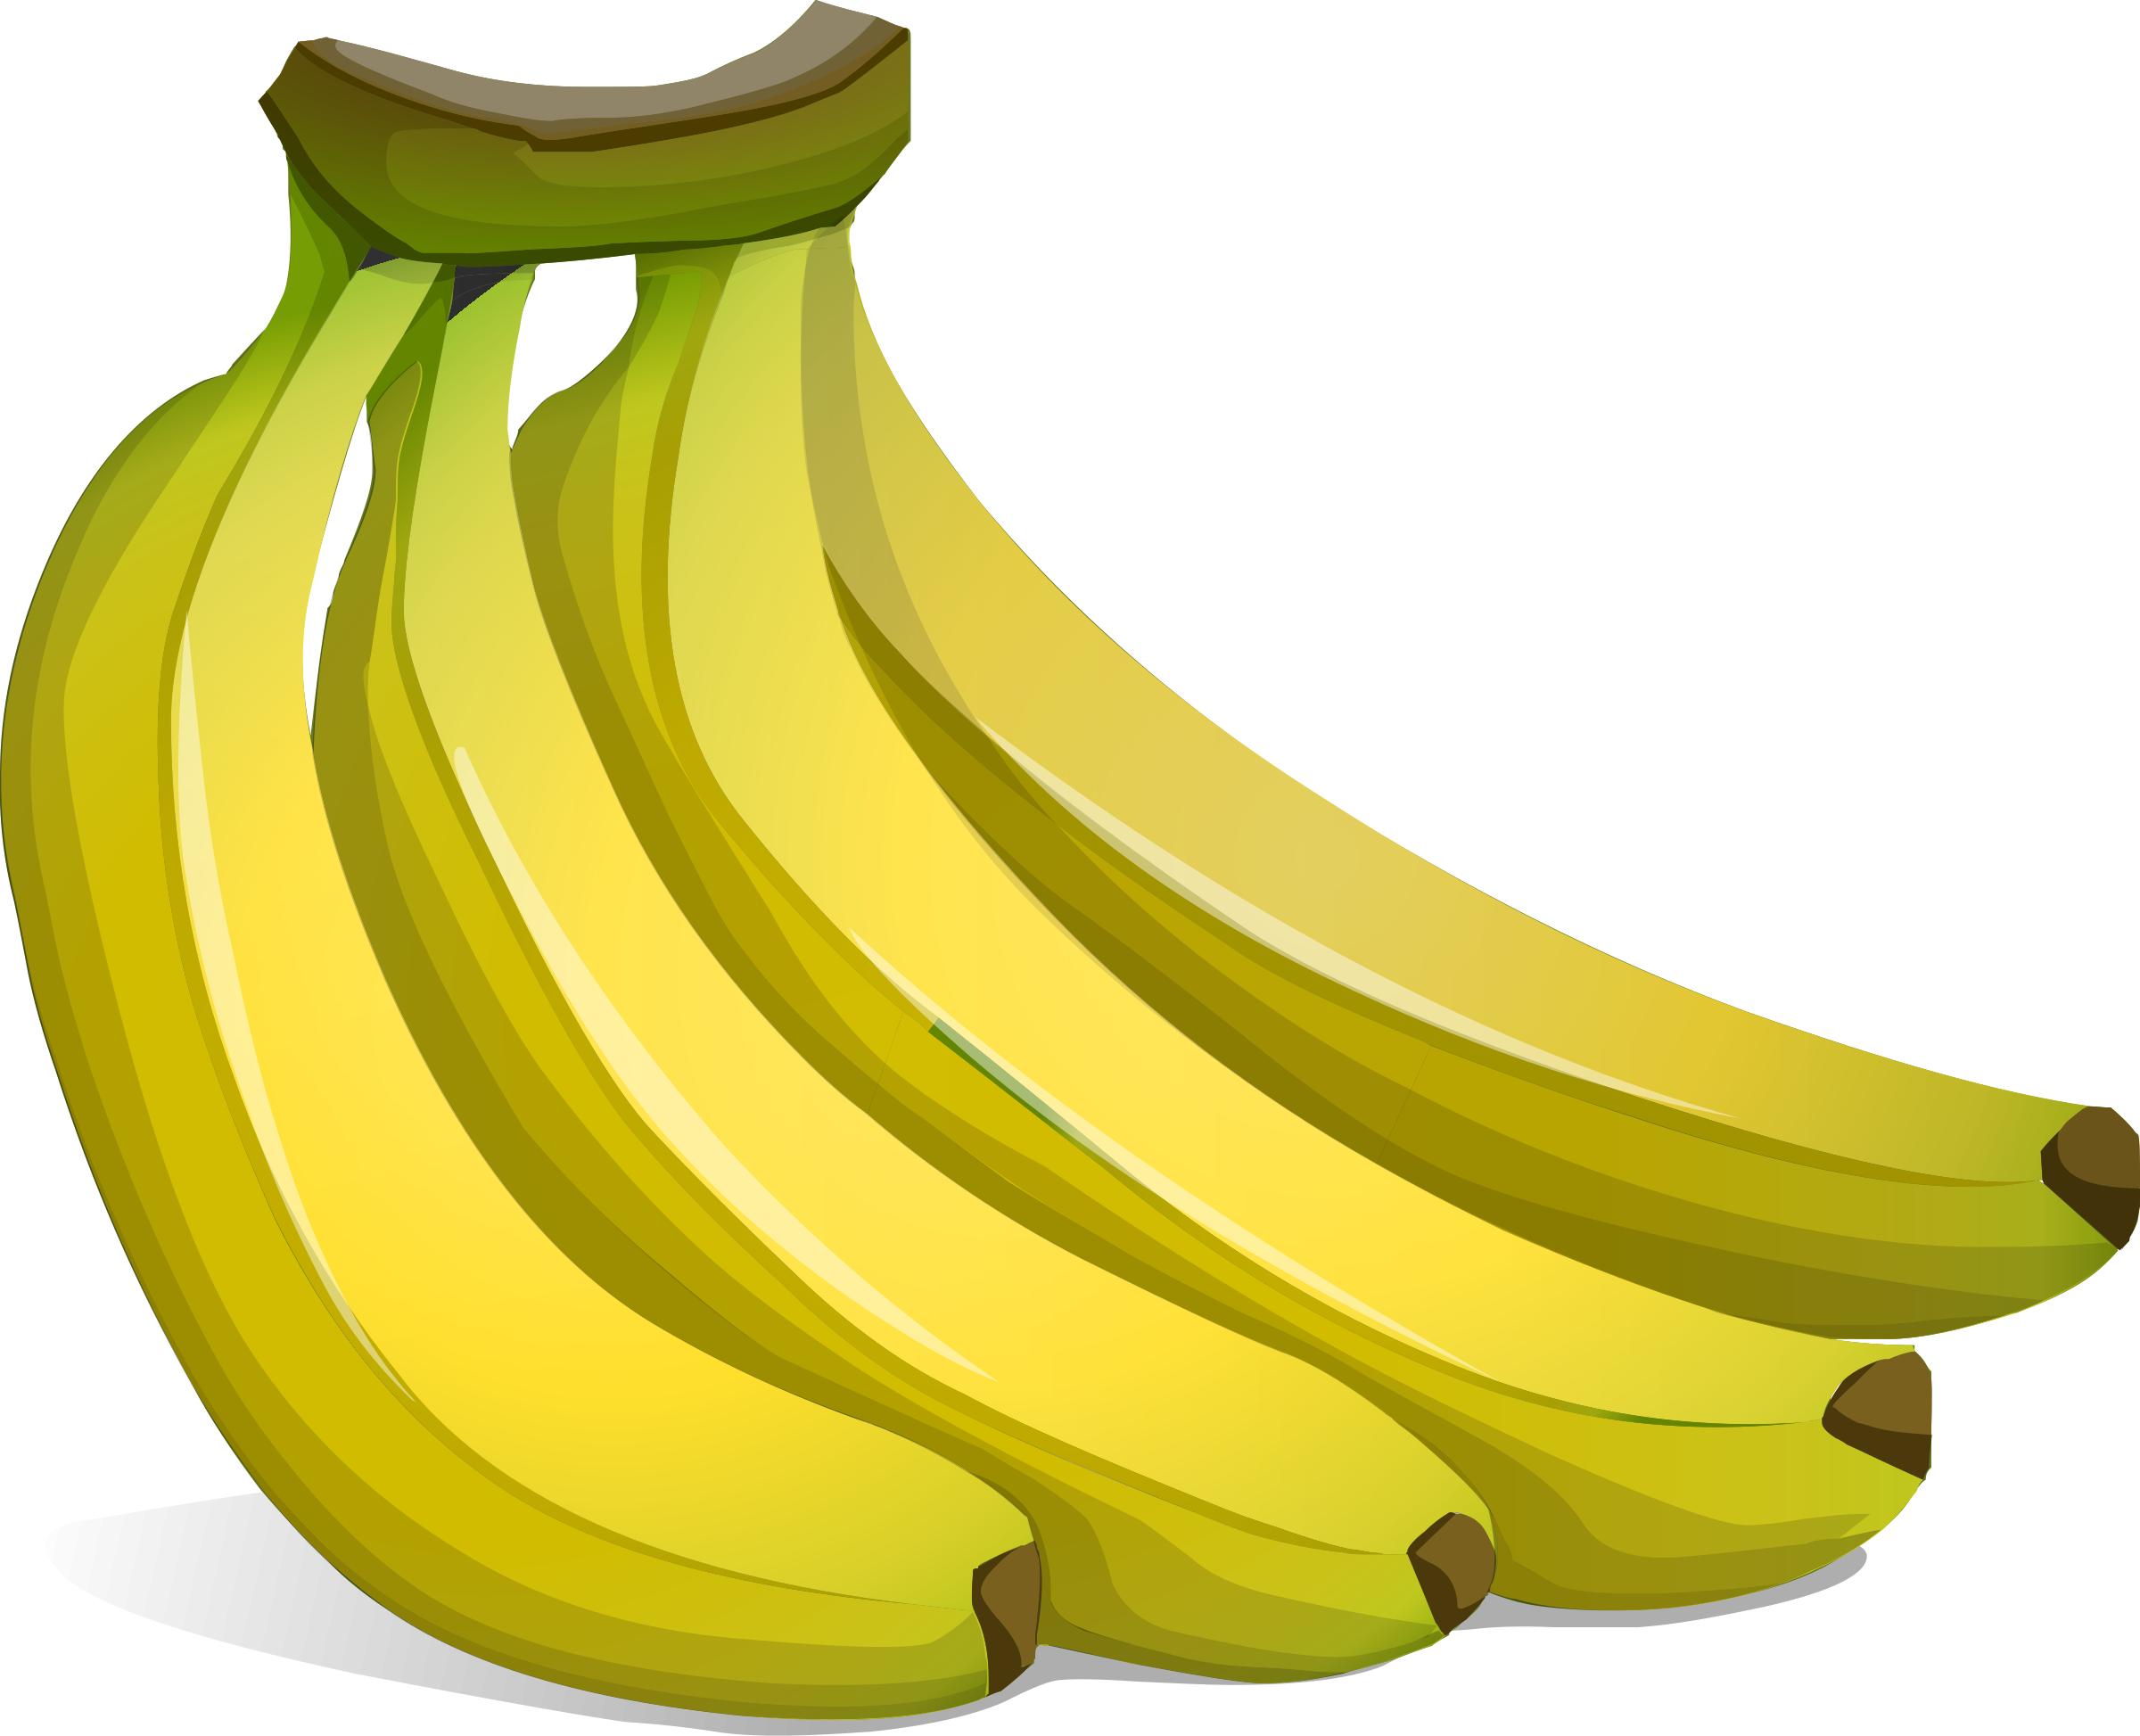 A bunch of bananas png